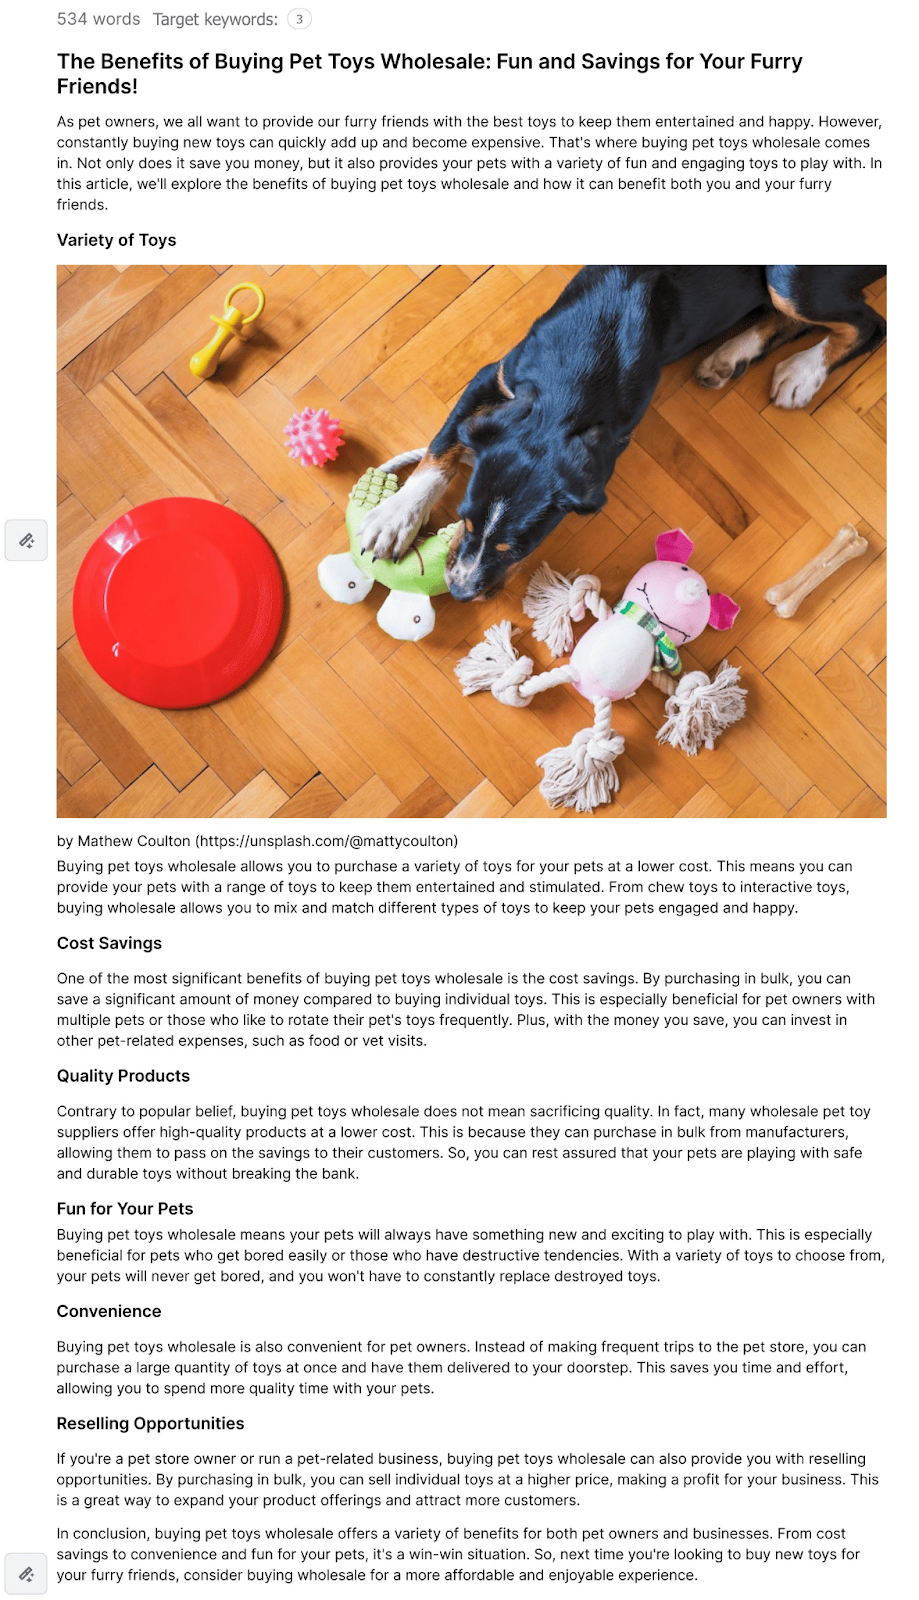 ContentShake AI-generated article on "The benefits of buying pet toys wholesale: fun and savings for your furry friends!"